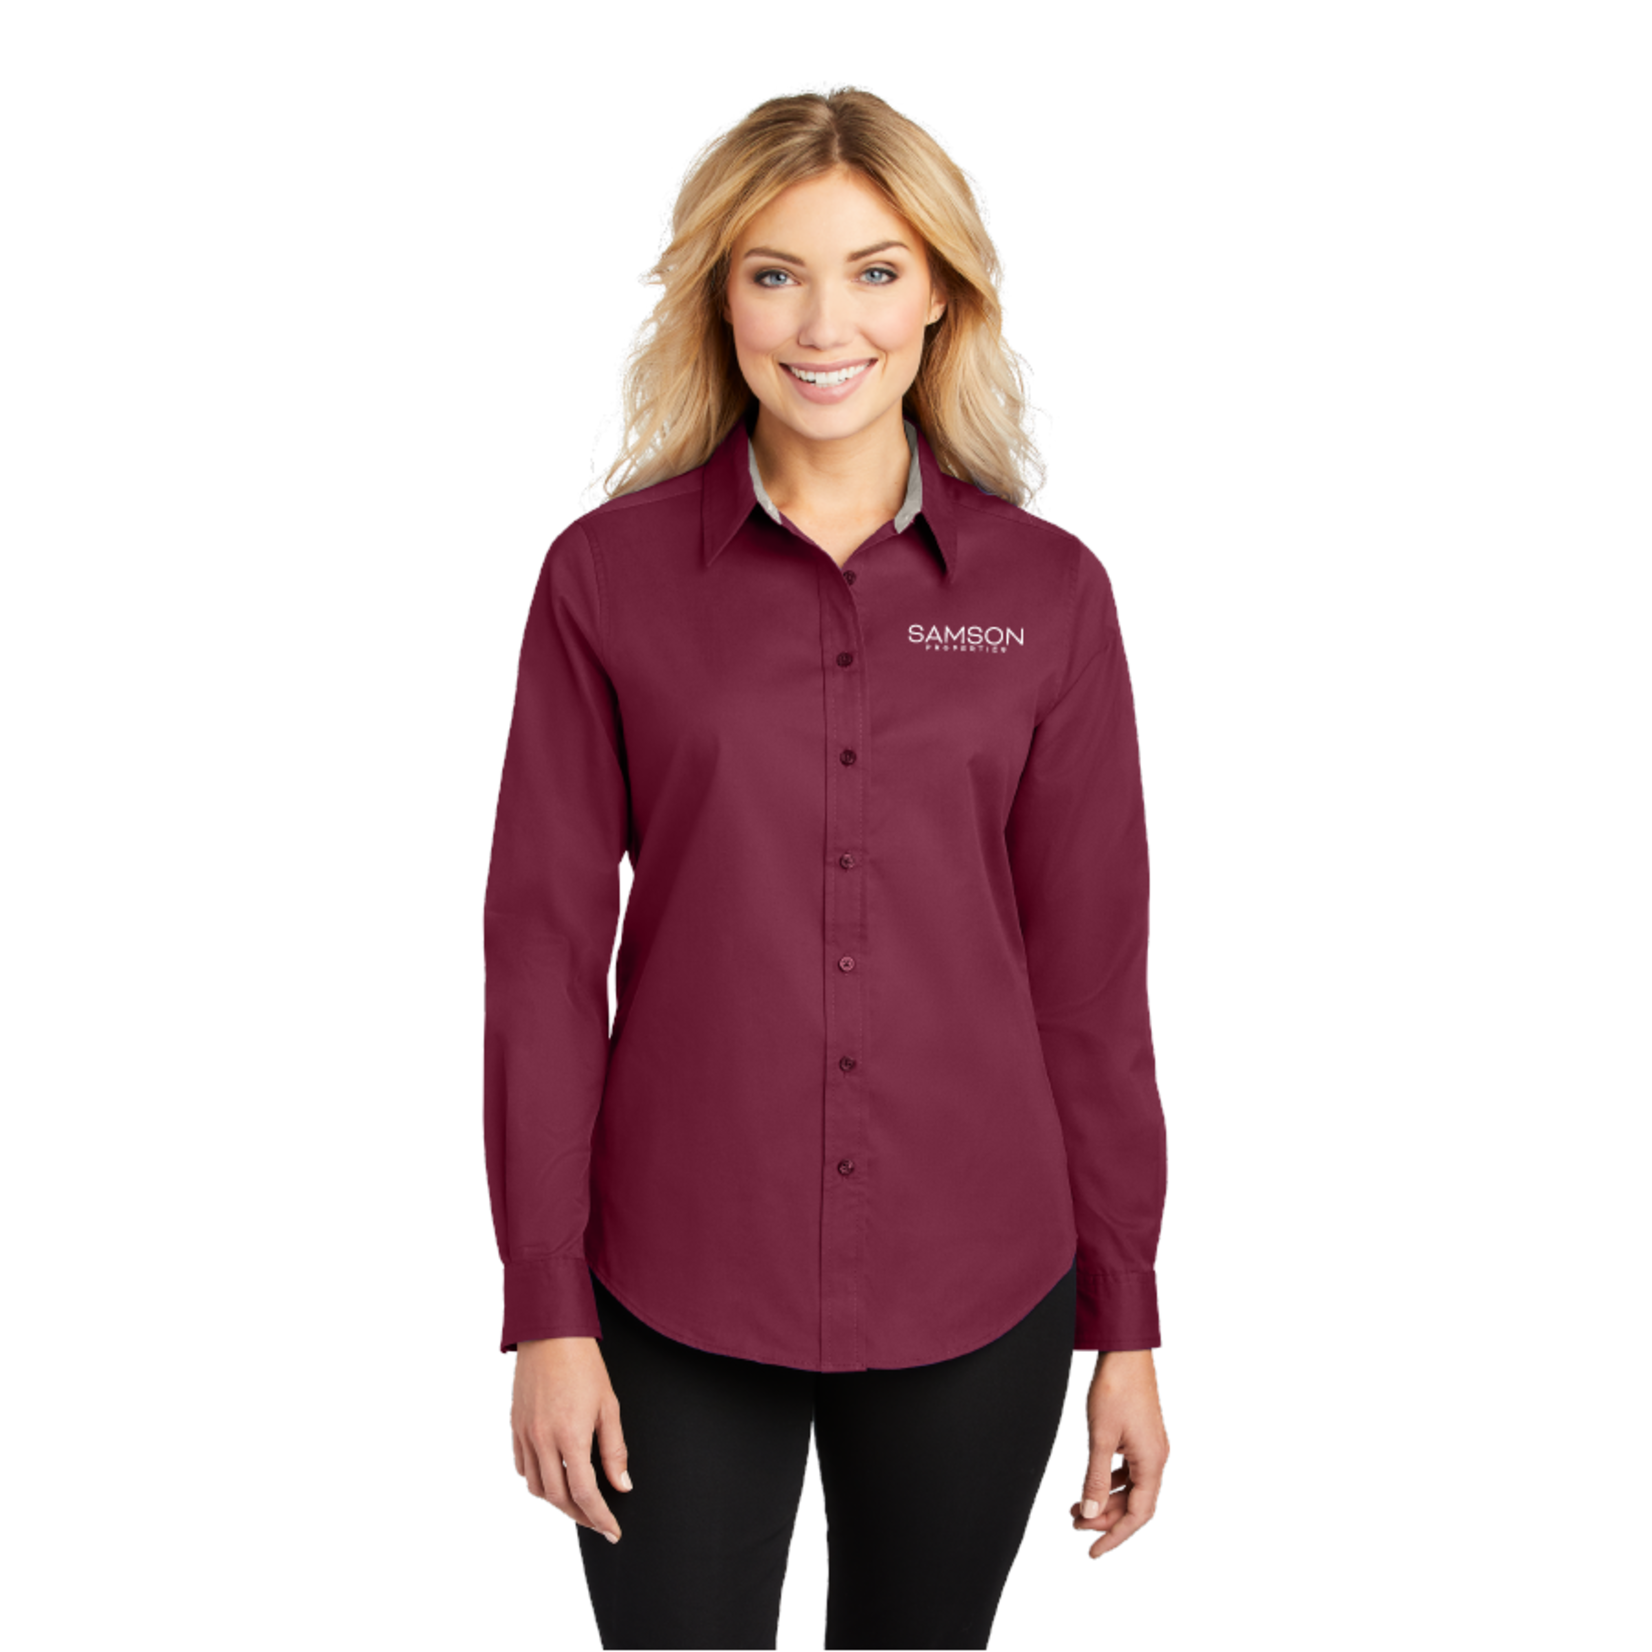 Ladies Long Sleeve Easy Care Shirt - L608 Port Authority